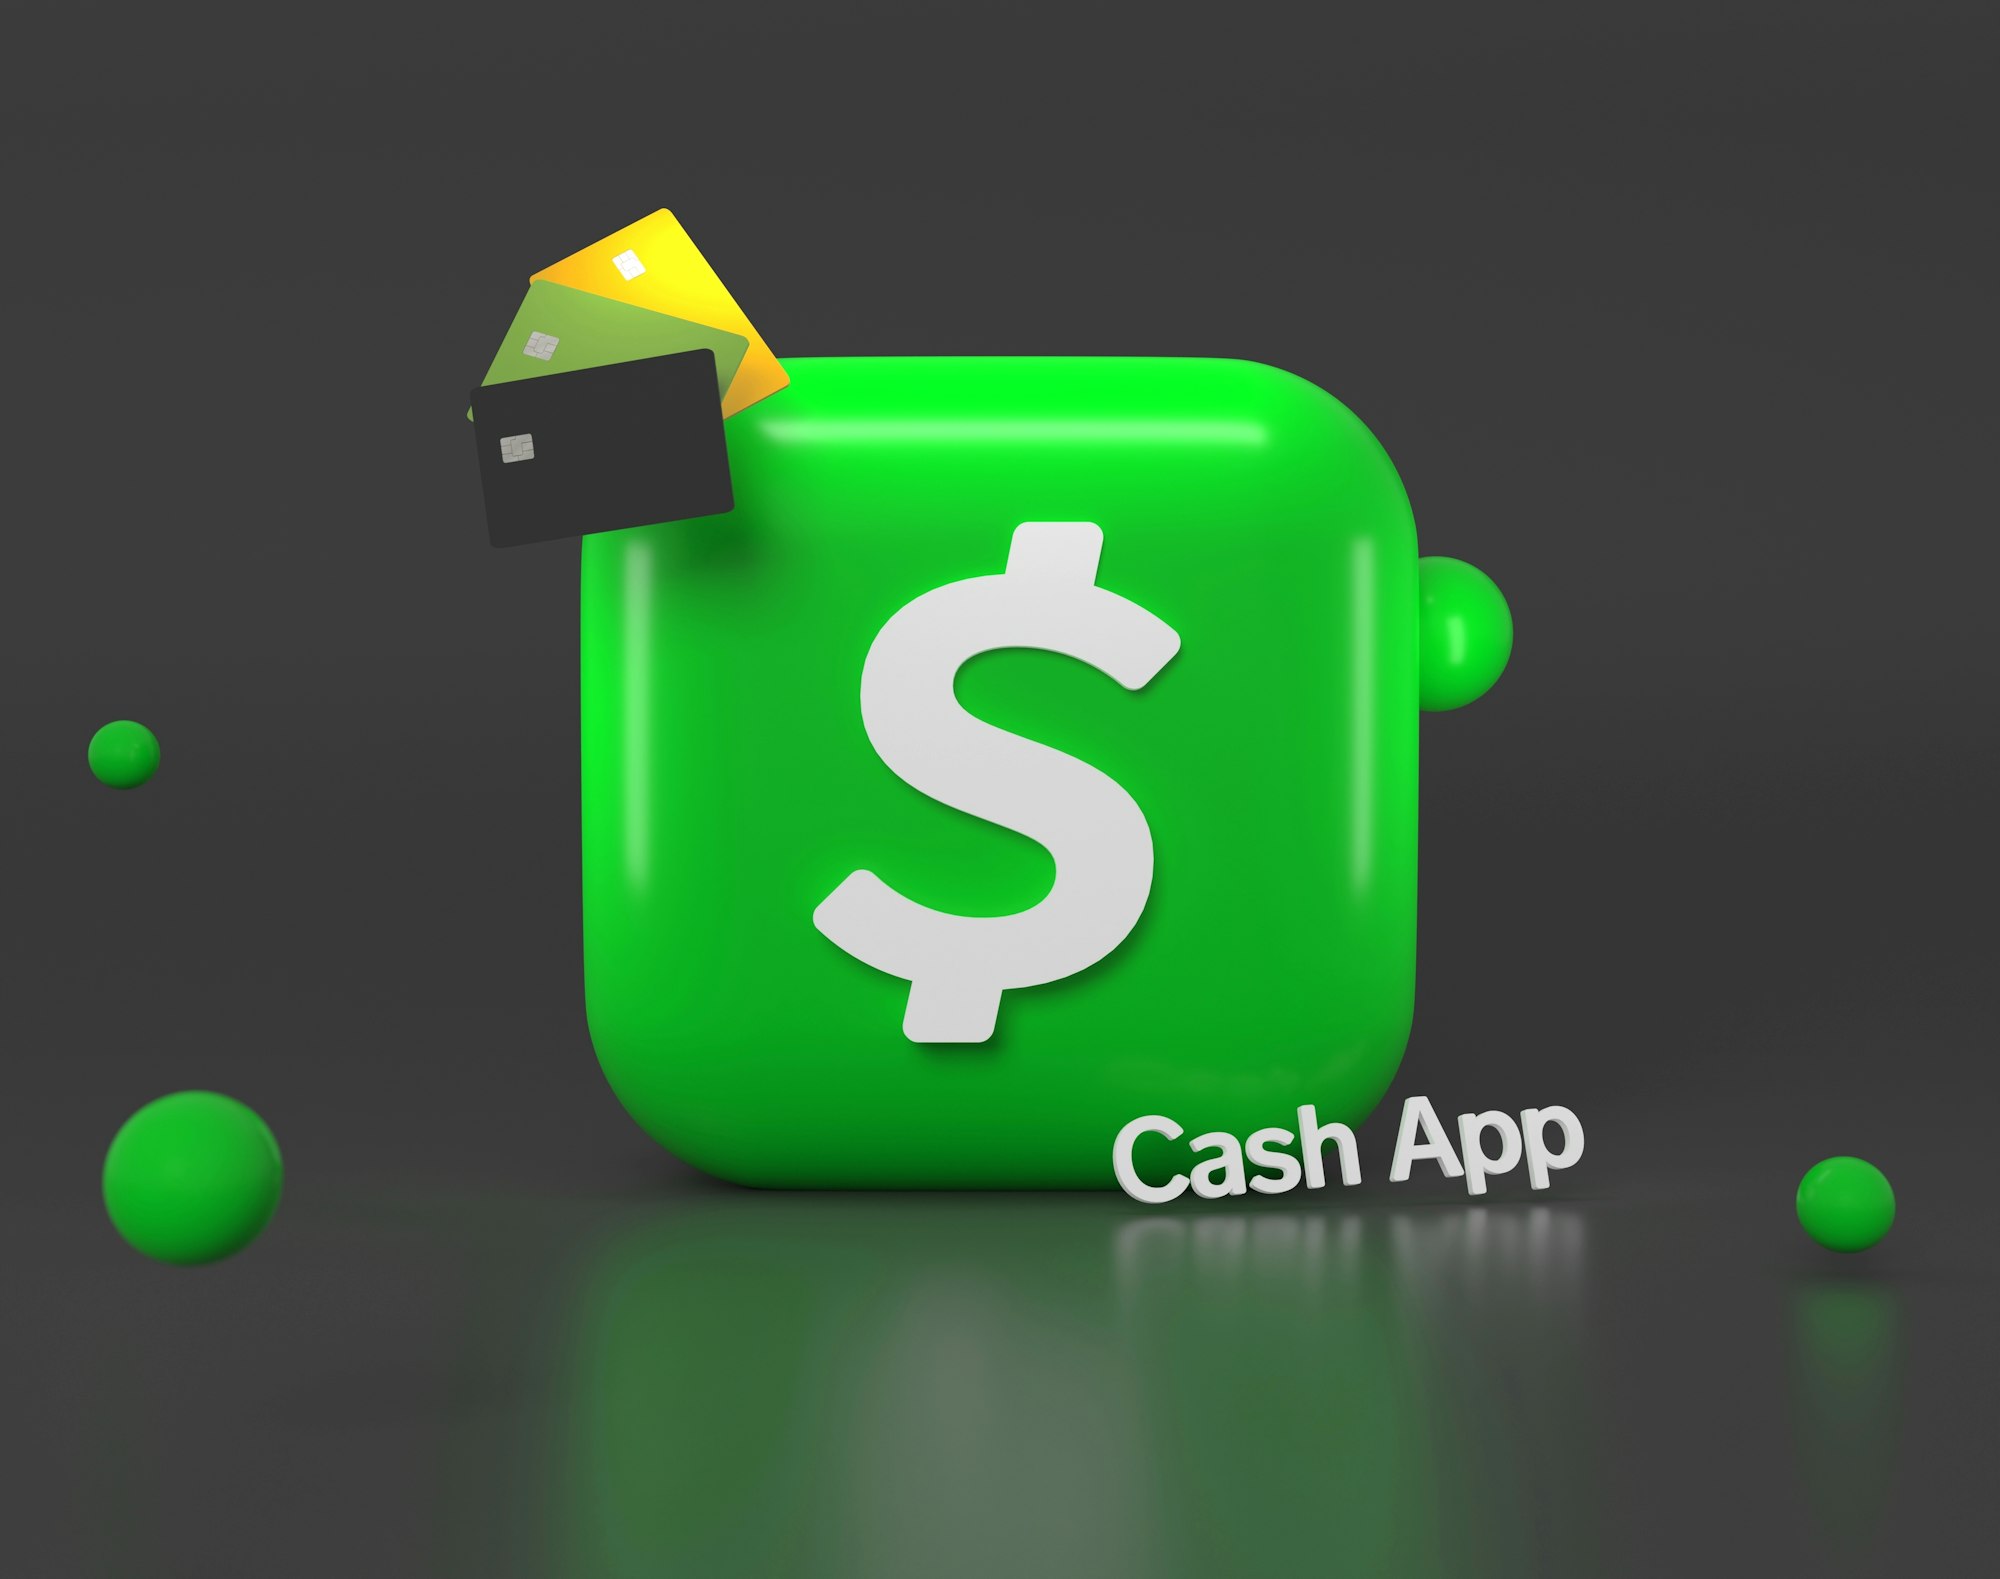 Cash App 3D icon. Feel free to contact me through email mariia.shalabaieva@gmail.com.
Check out my previous collections “Top Cryptocurrencies” and "Elon Musk". 